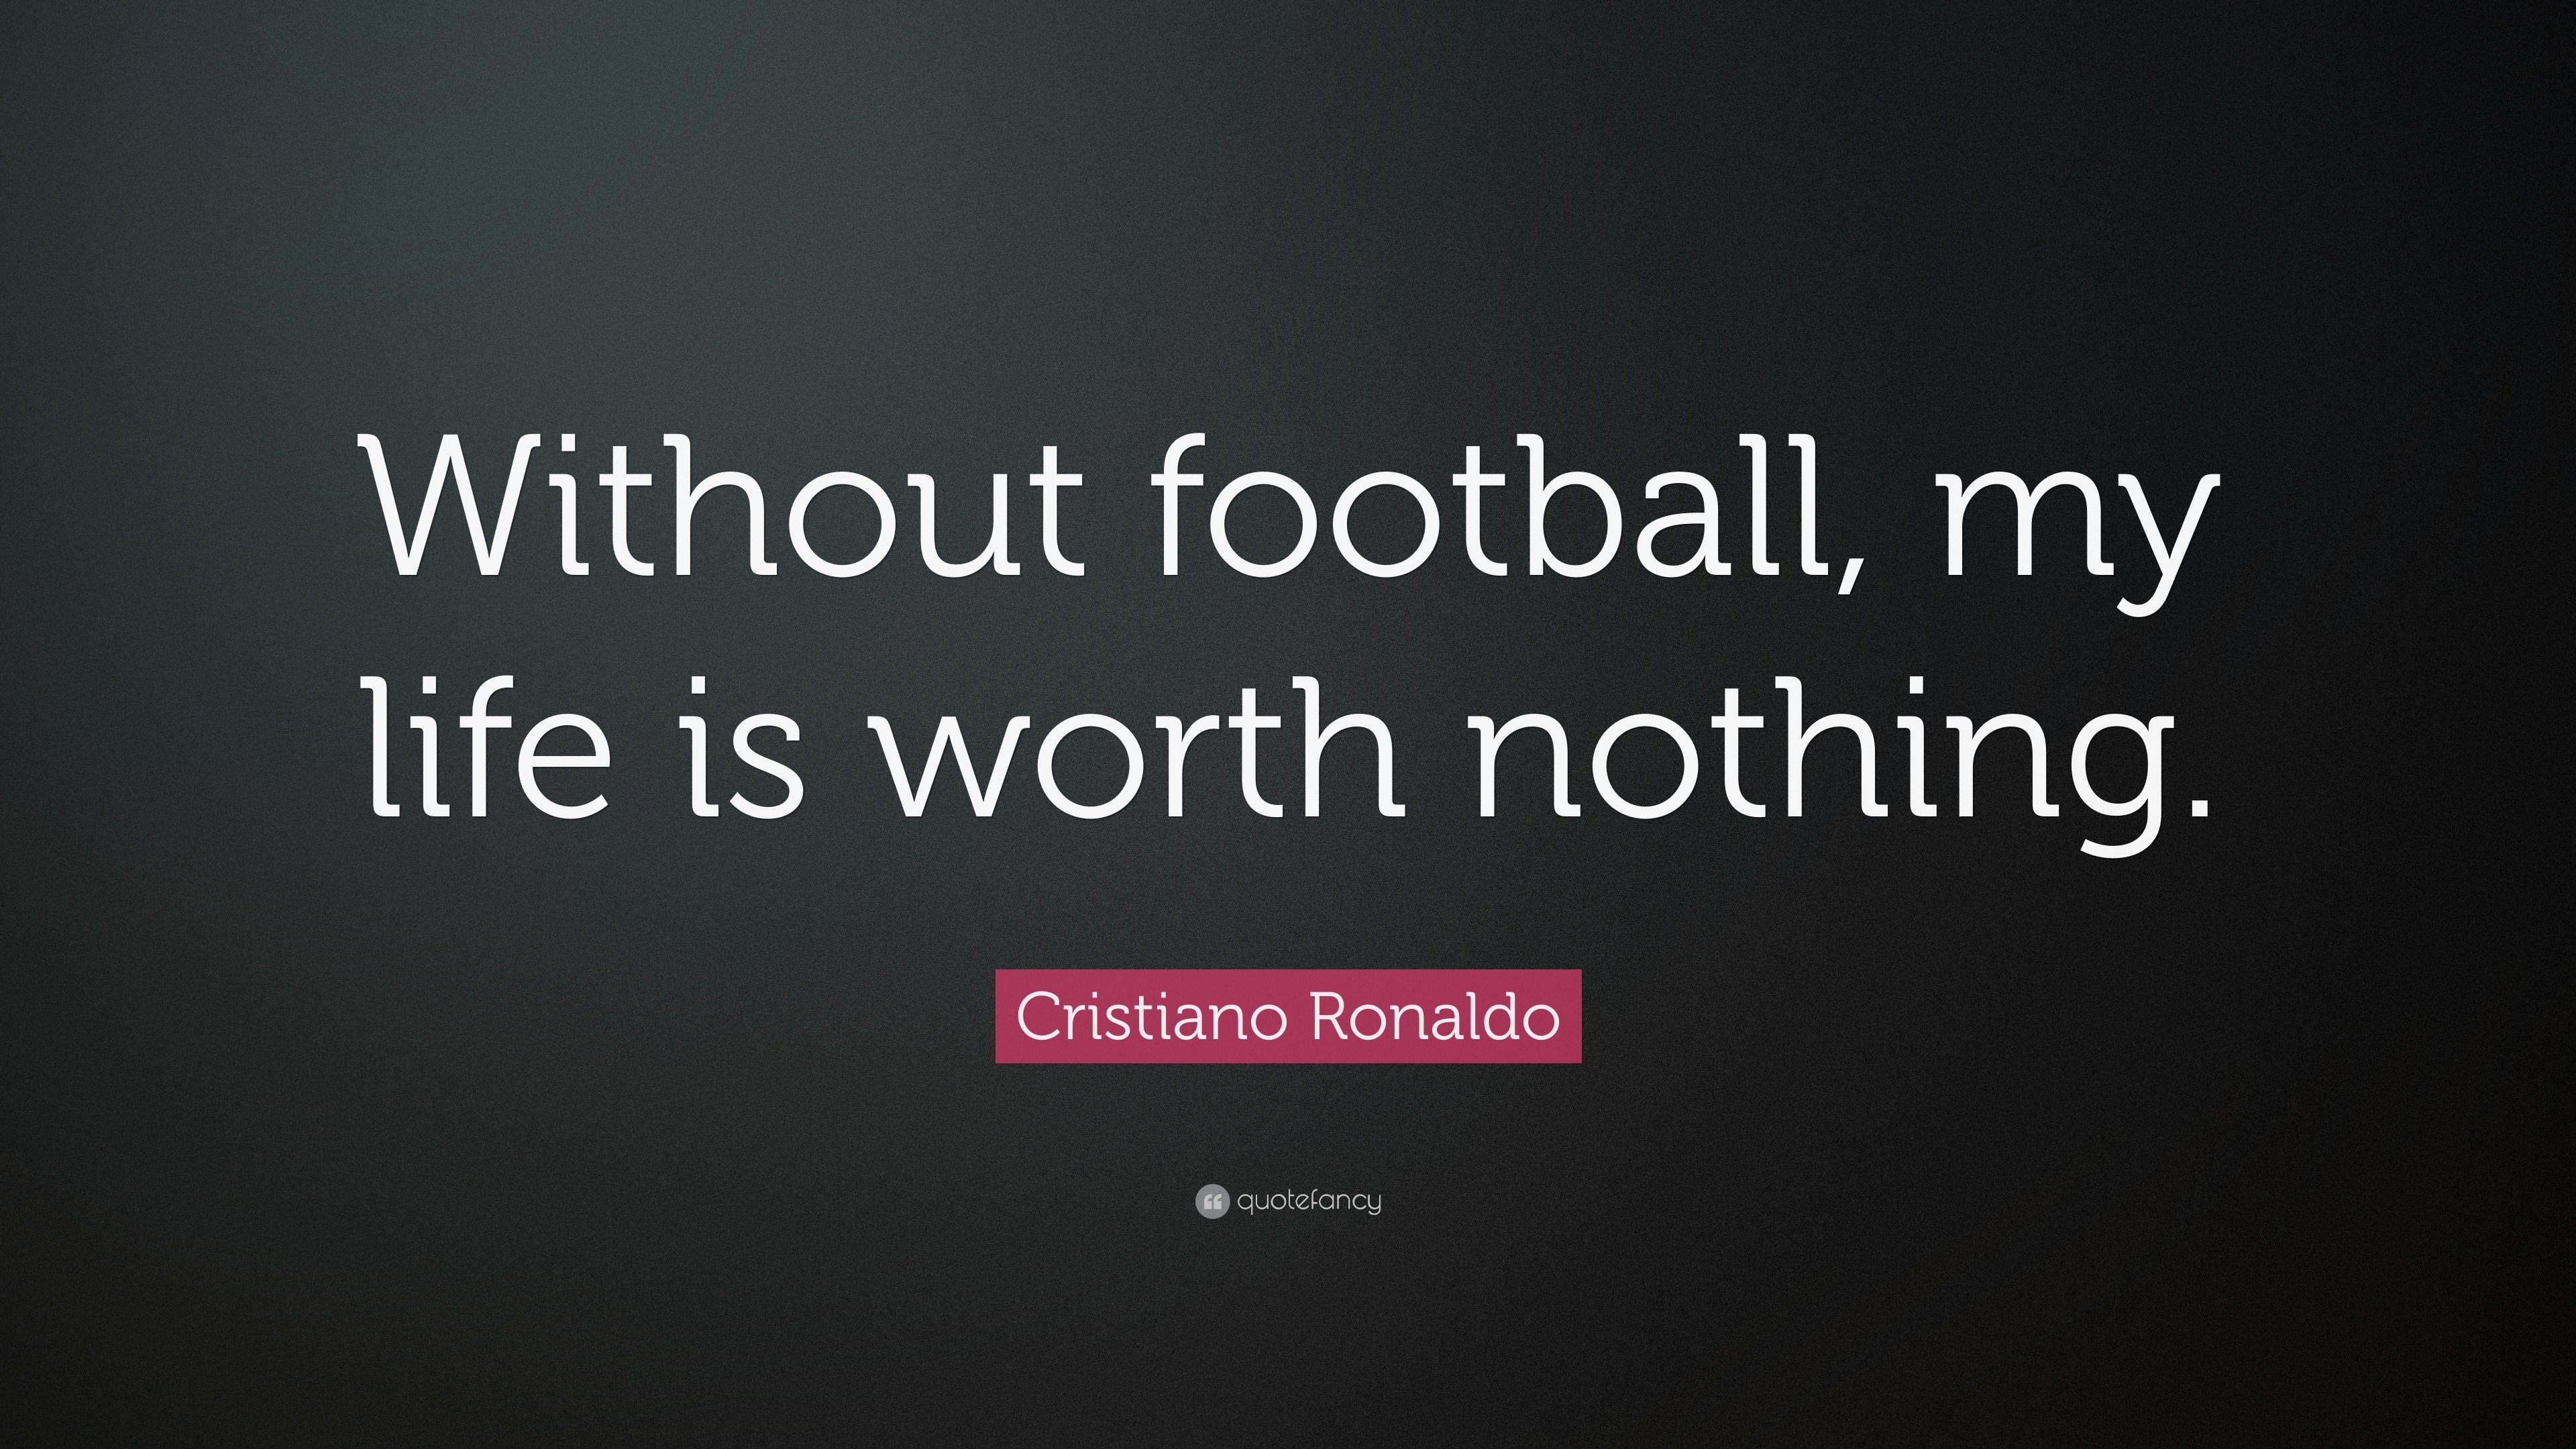 Cristiano Ronaldo Quote: “Without football, my life is worth nothing.”